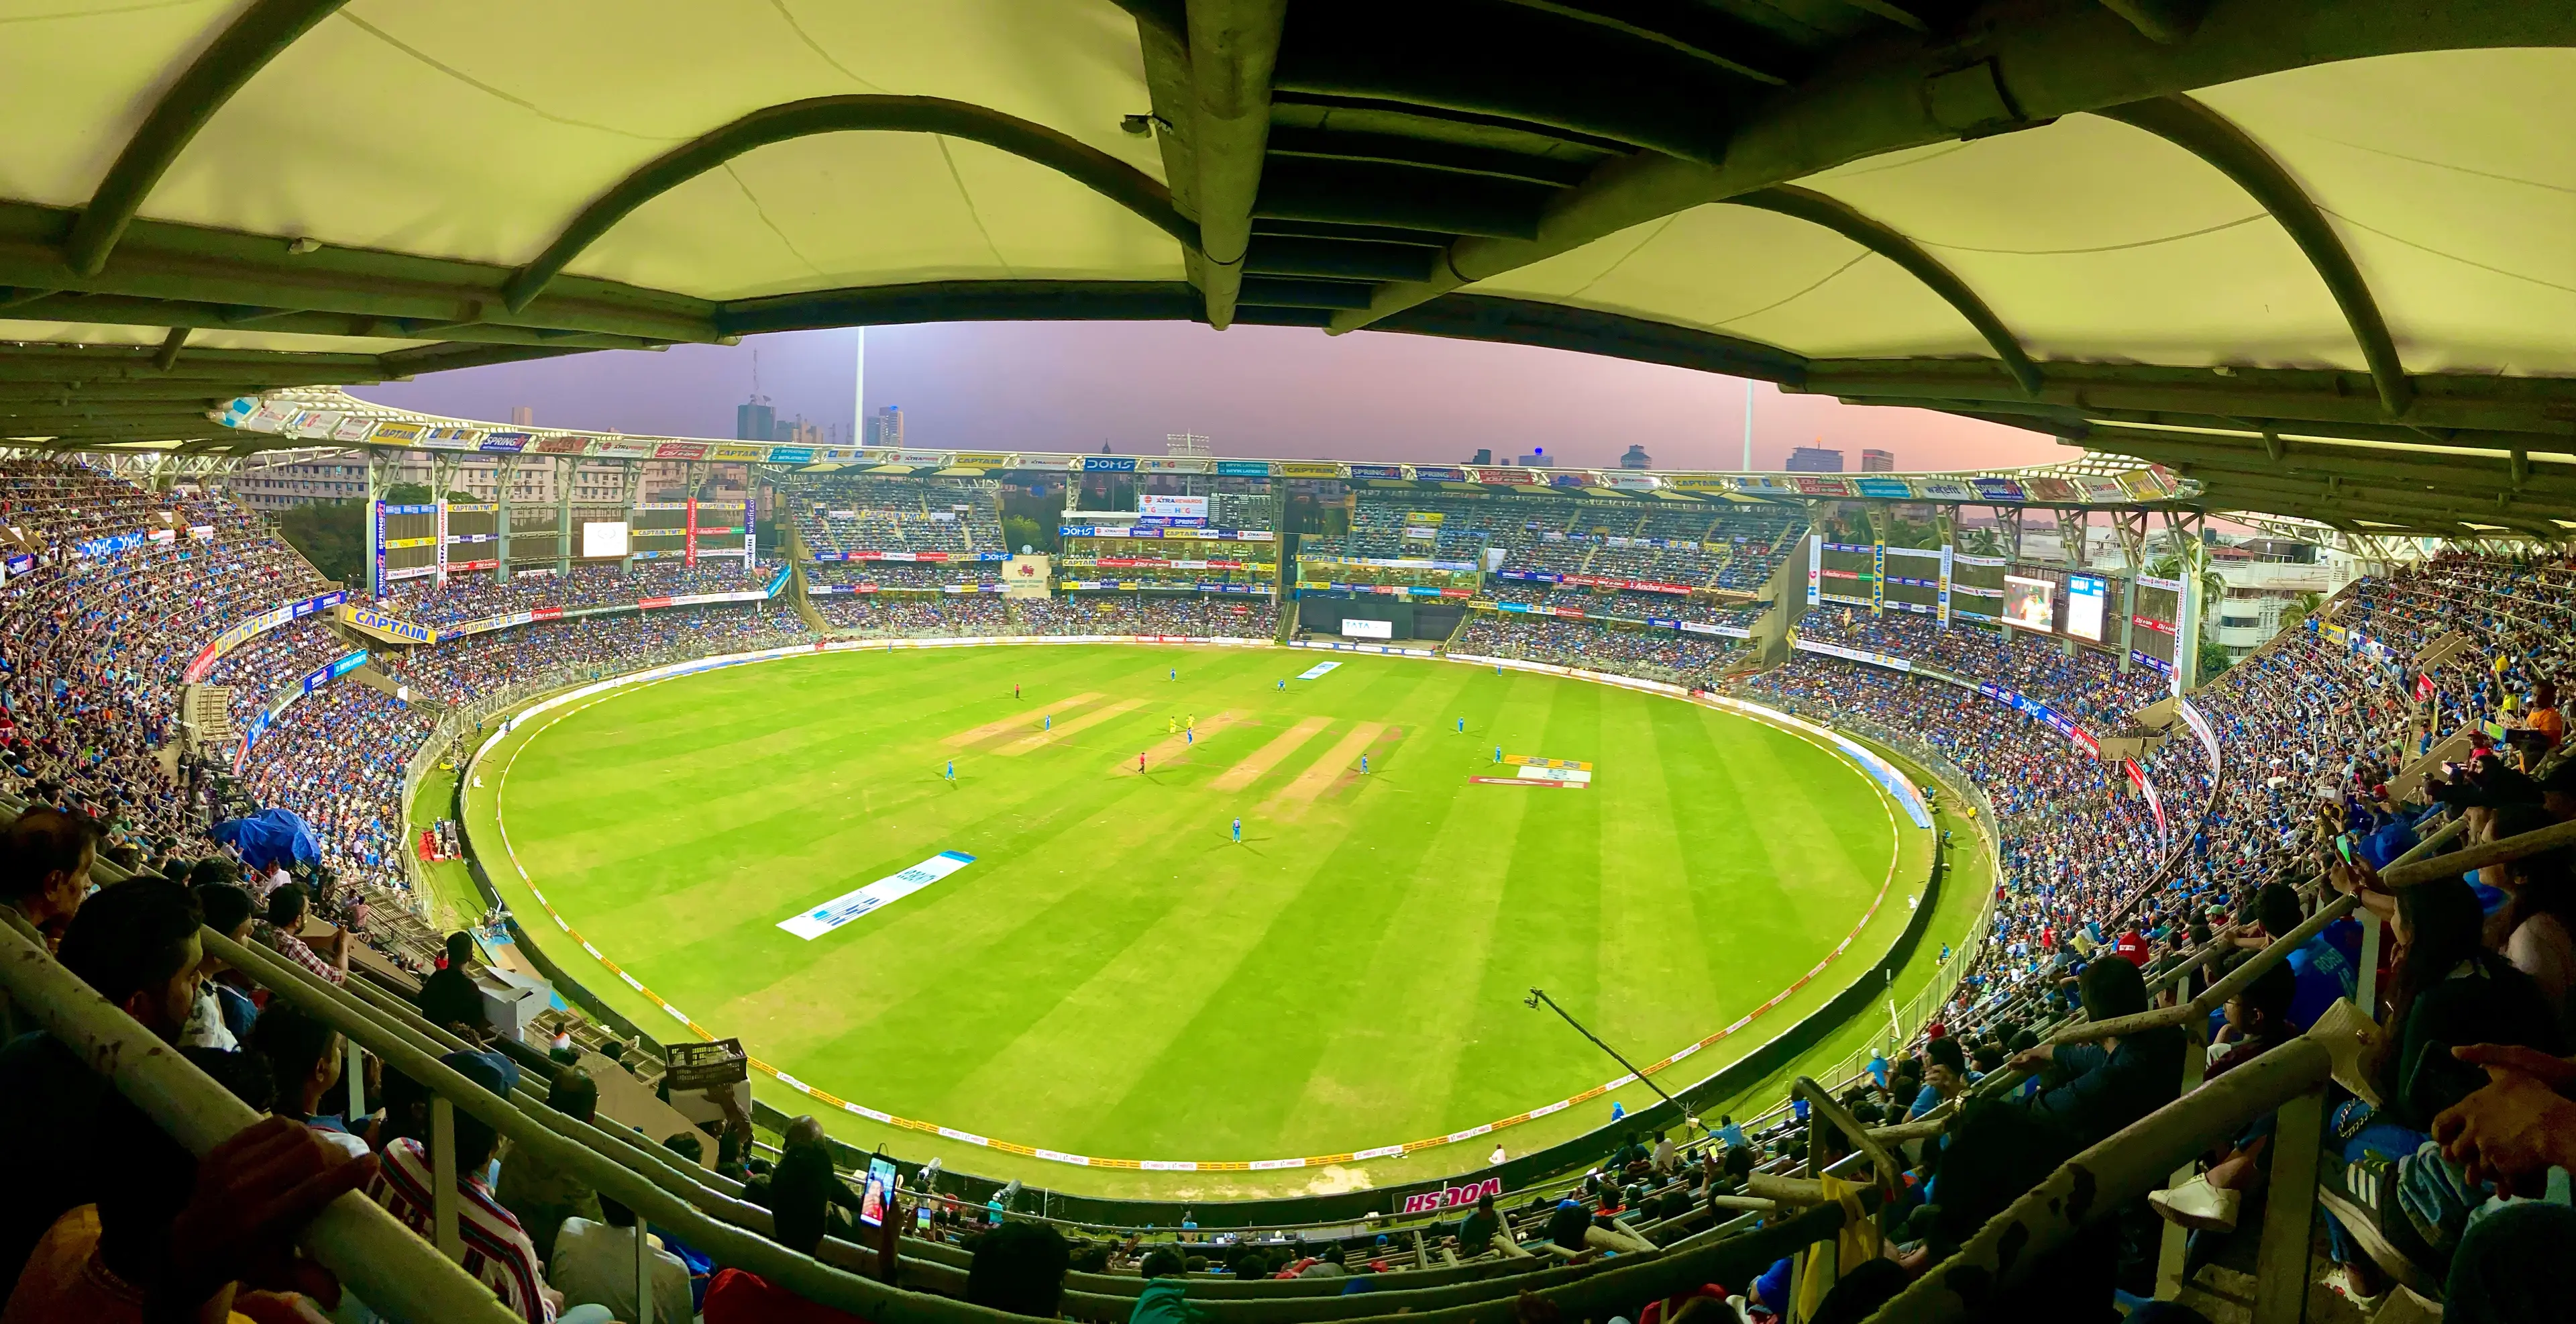 A view of Mumbai Cricket Stadium from the stands